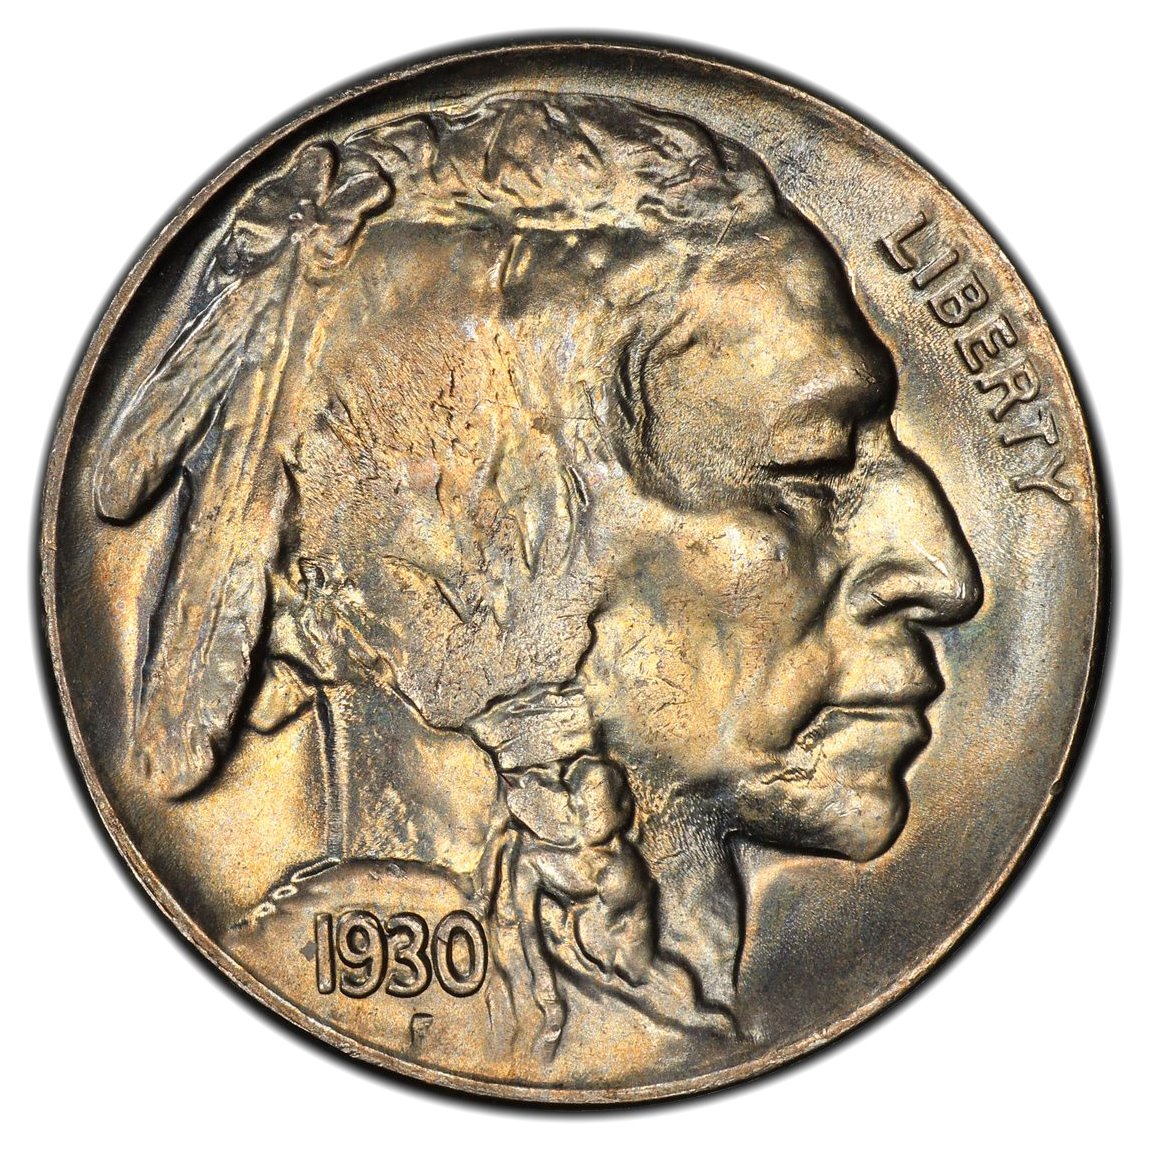 Top 17 Most Valuable Buffalo Nickels - CoinValueLookup 